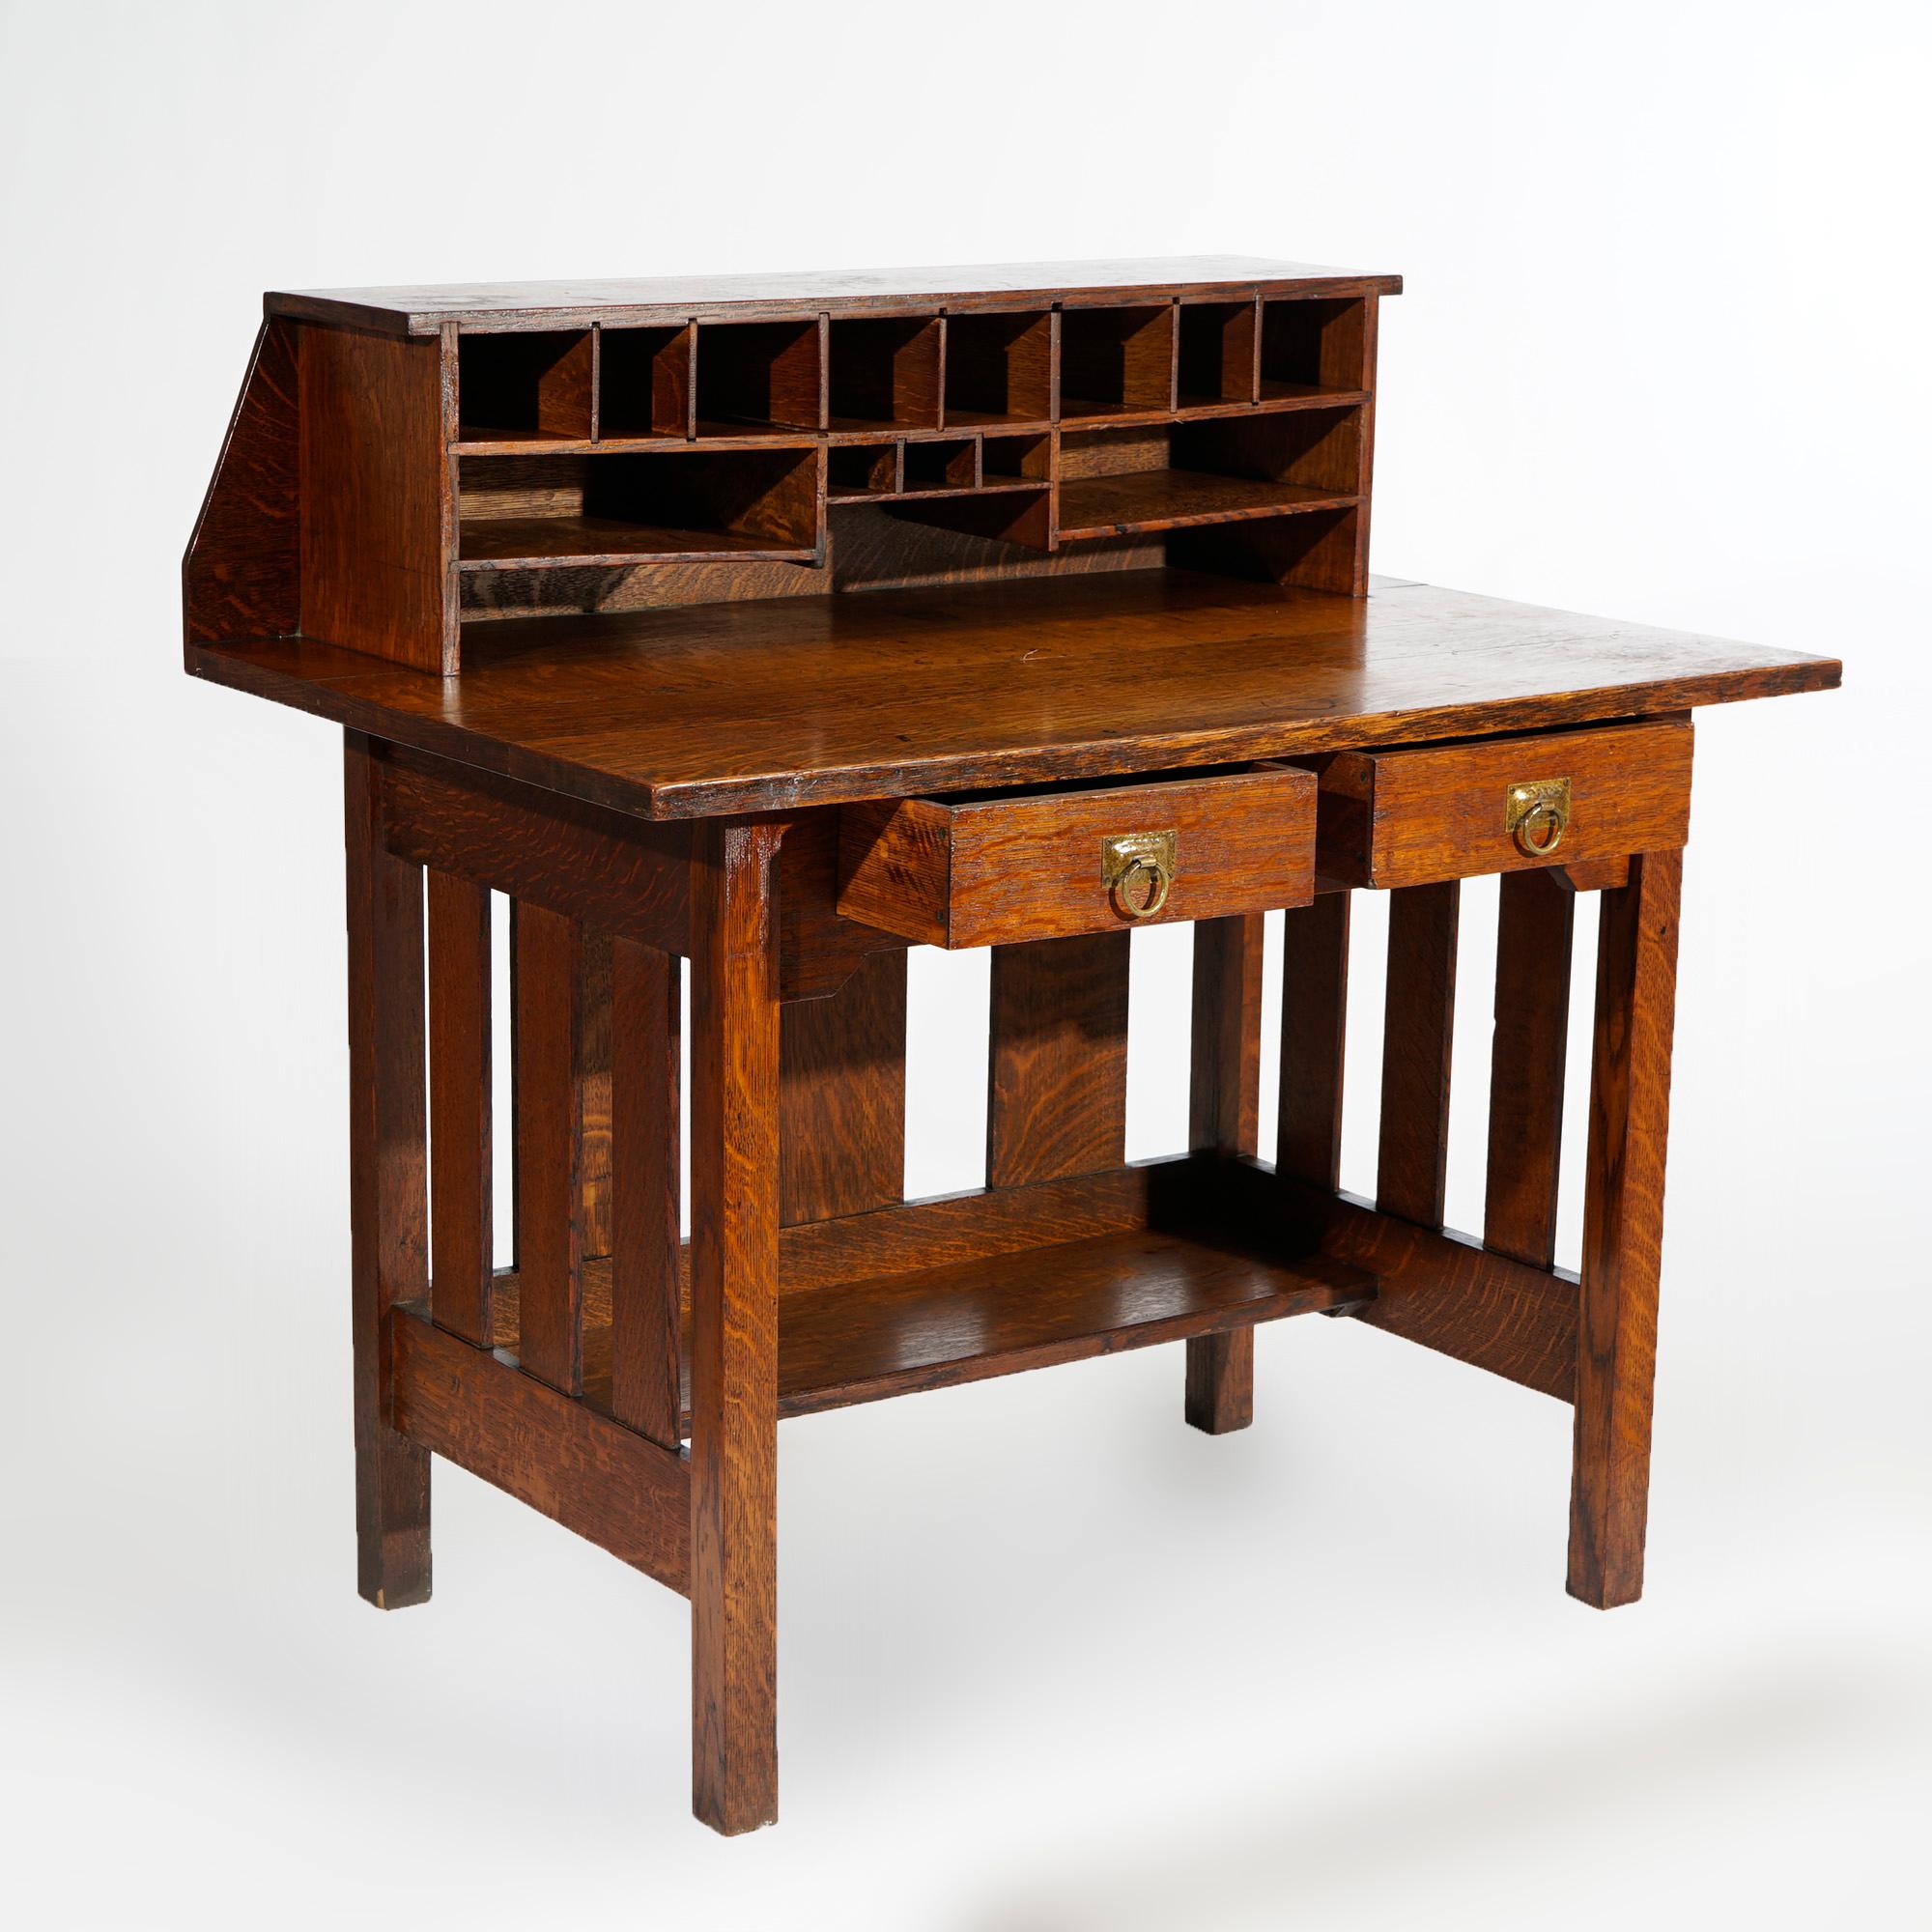 An antique Arts and Crafts Mission operator desk by Stickley Brothers offers quarter sawn oak construction with upper having pigeon holes over desk with two drawers and slat sides, unsigned, reminiscent of a railroad desk, circa 1910

Measures-